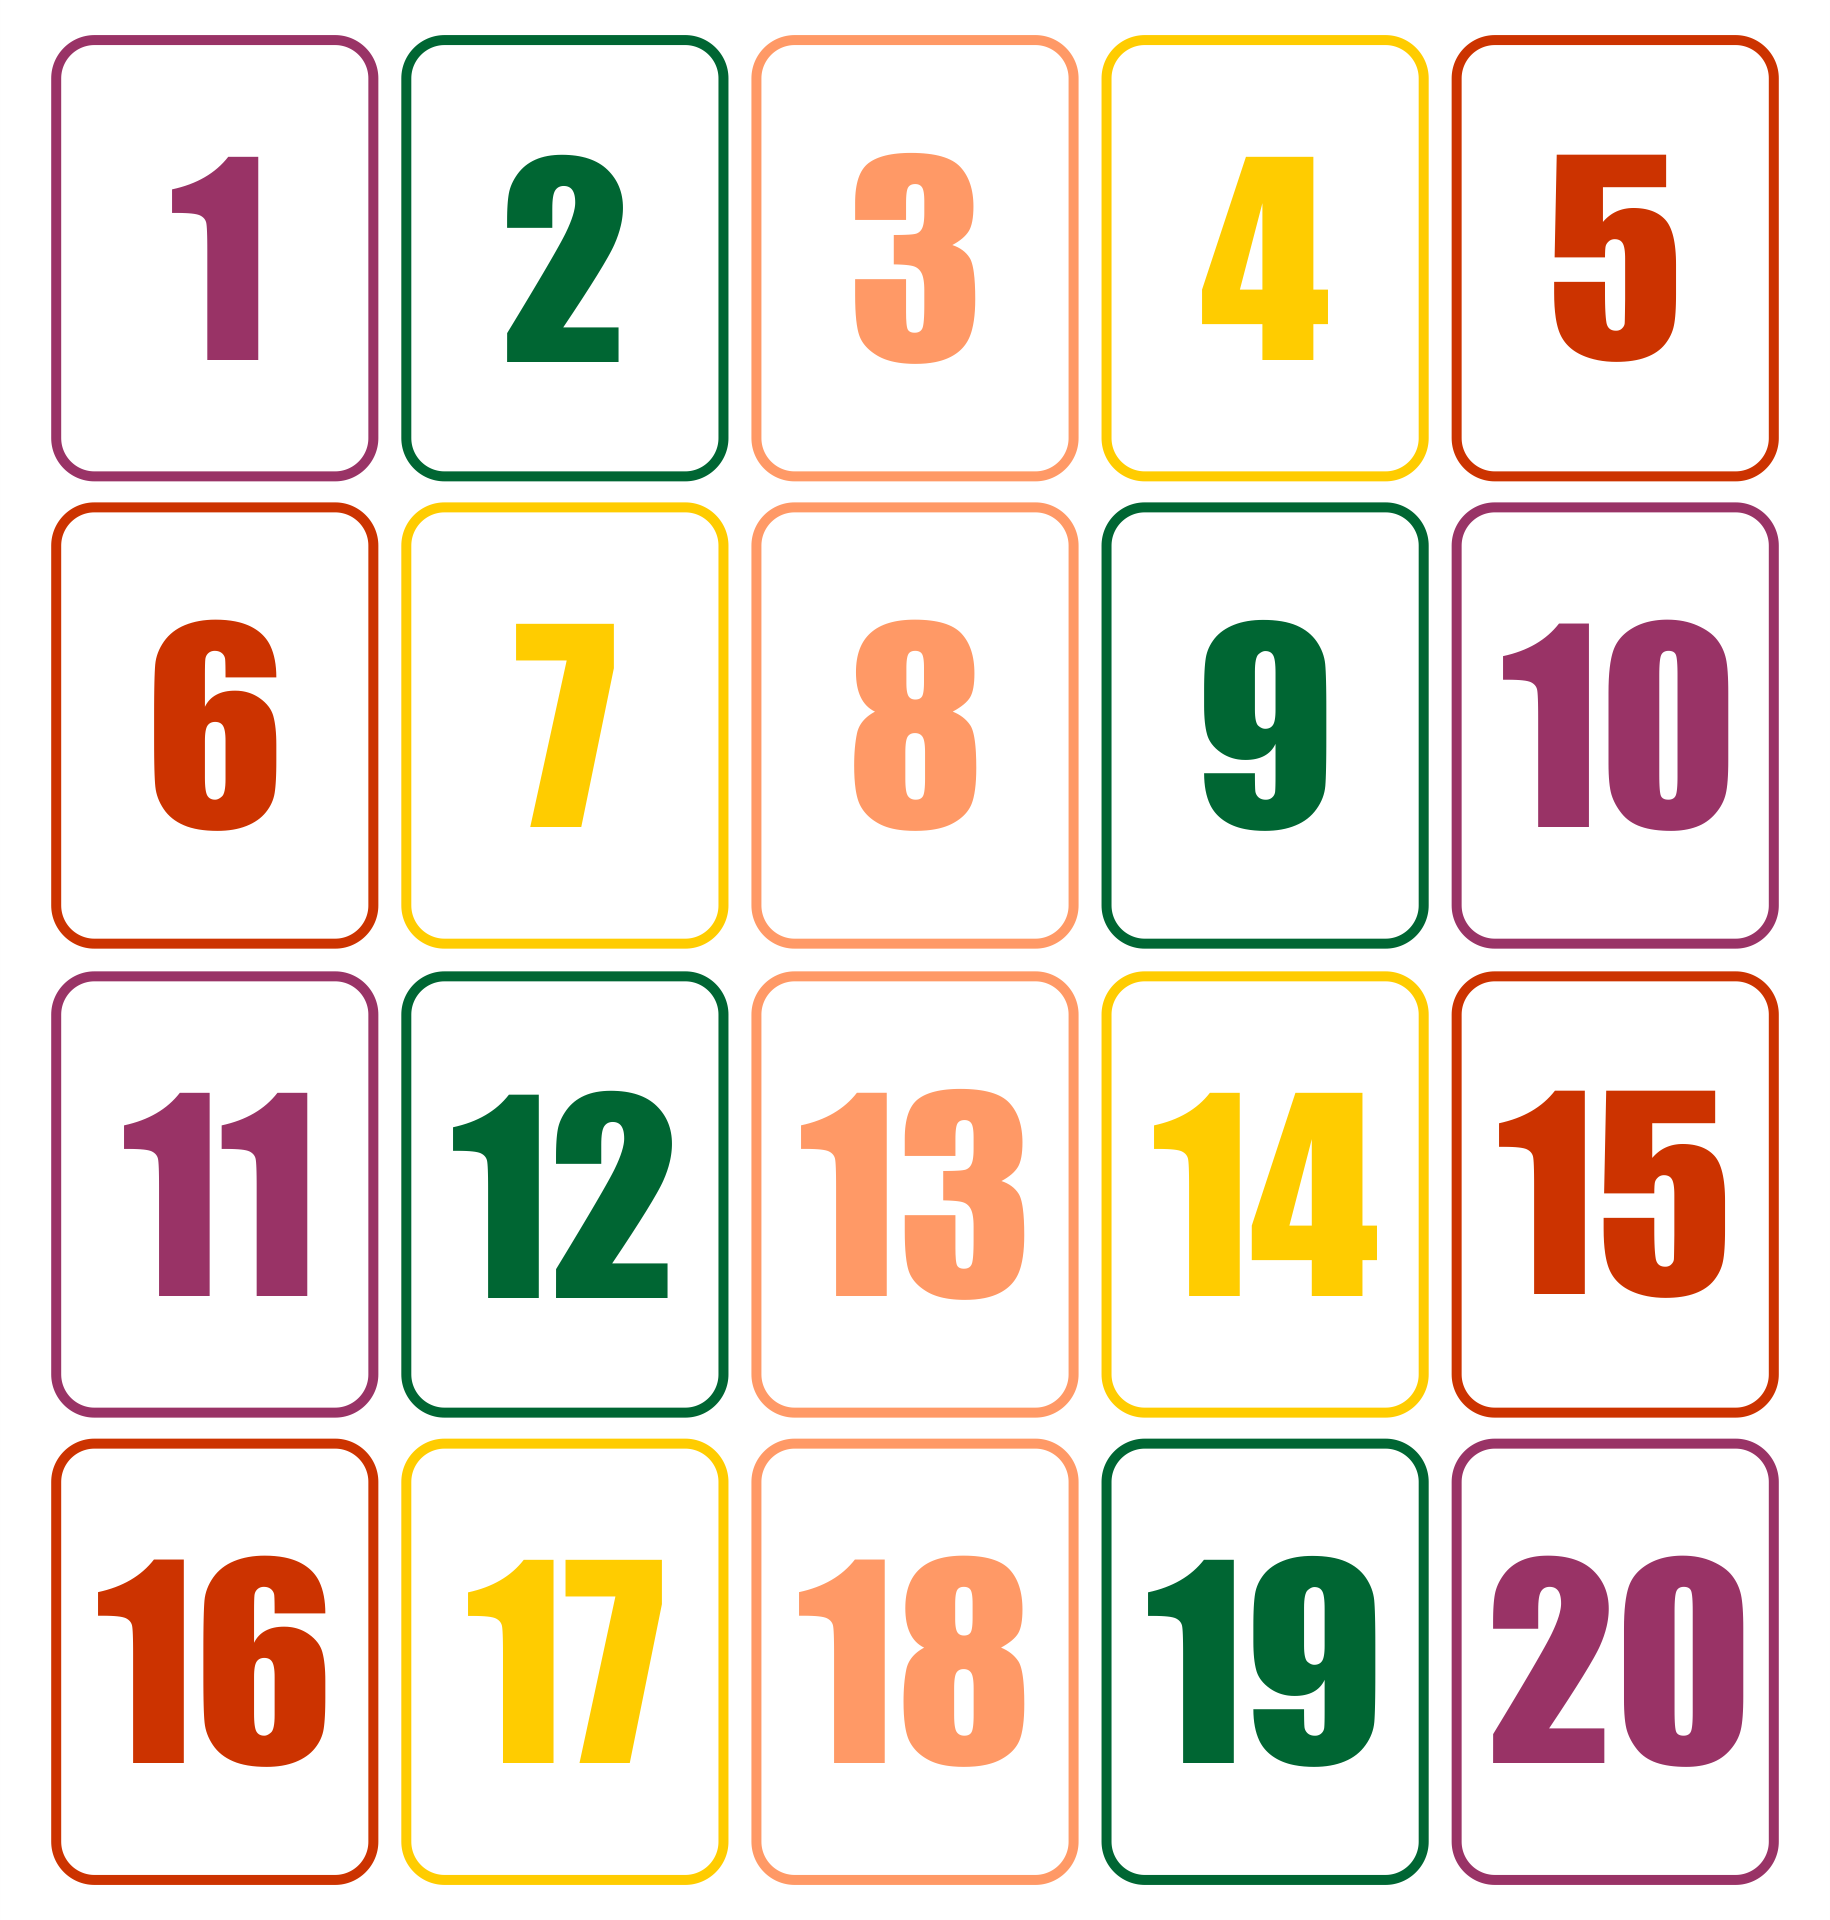 free-numbers-printables-1-to-20-get-your-hands-on-amazing-free